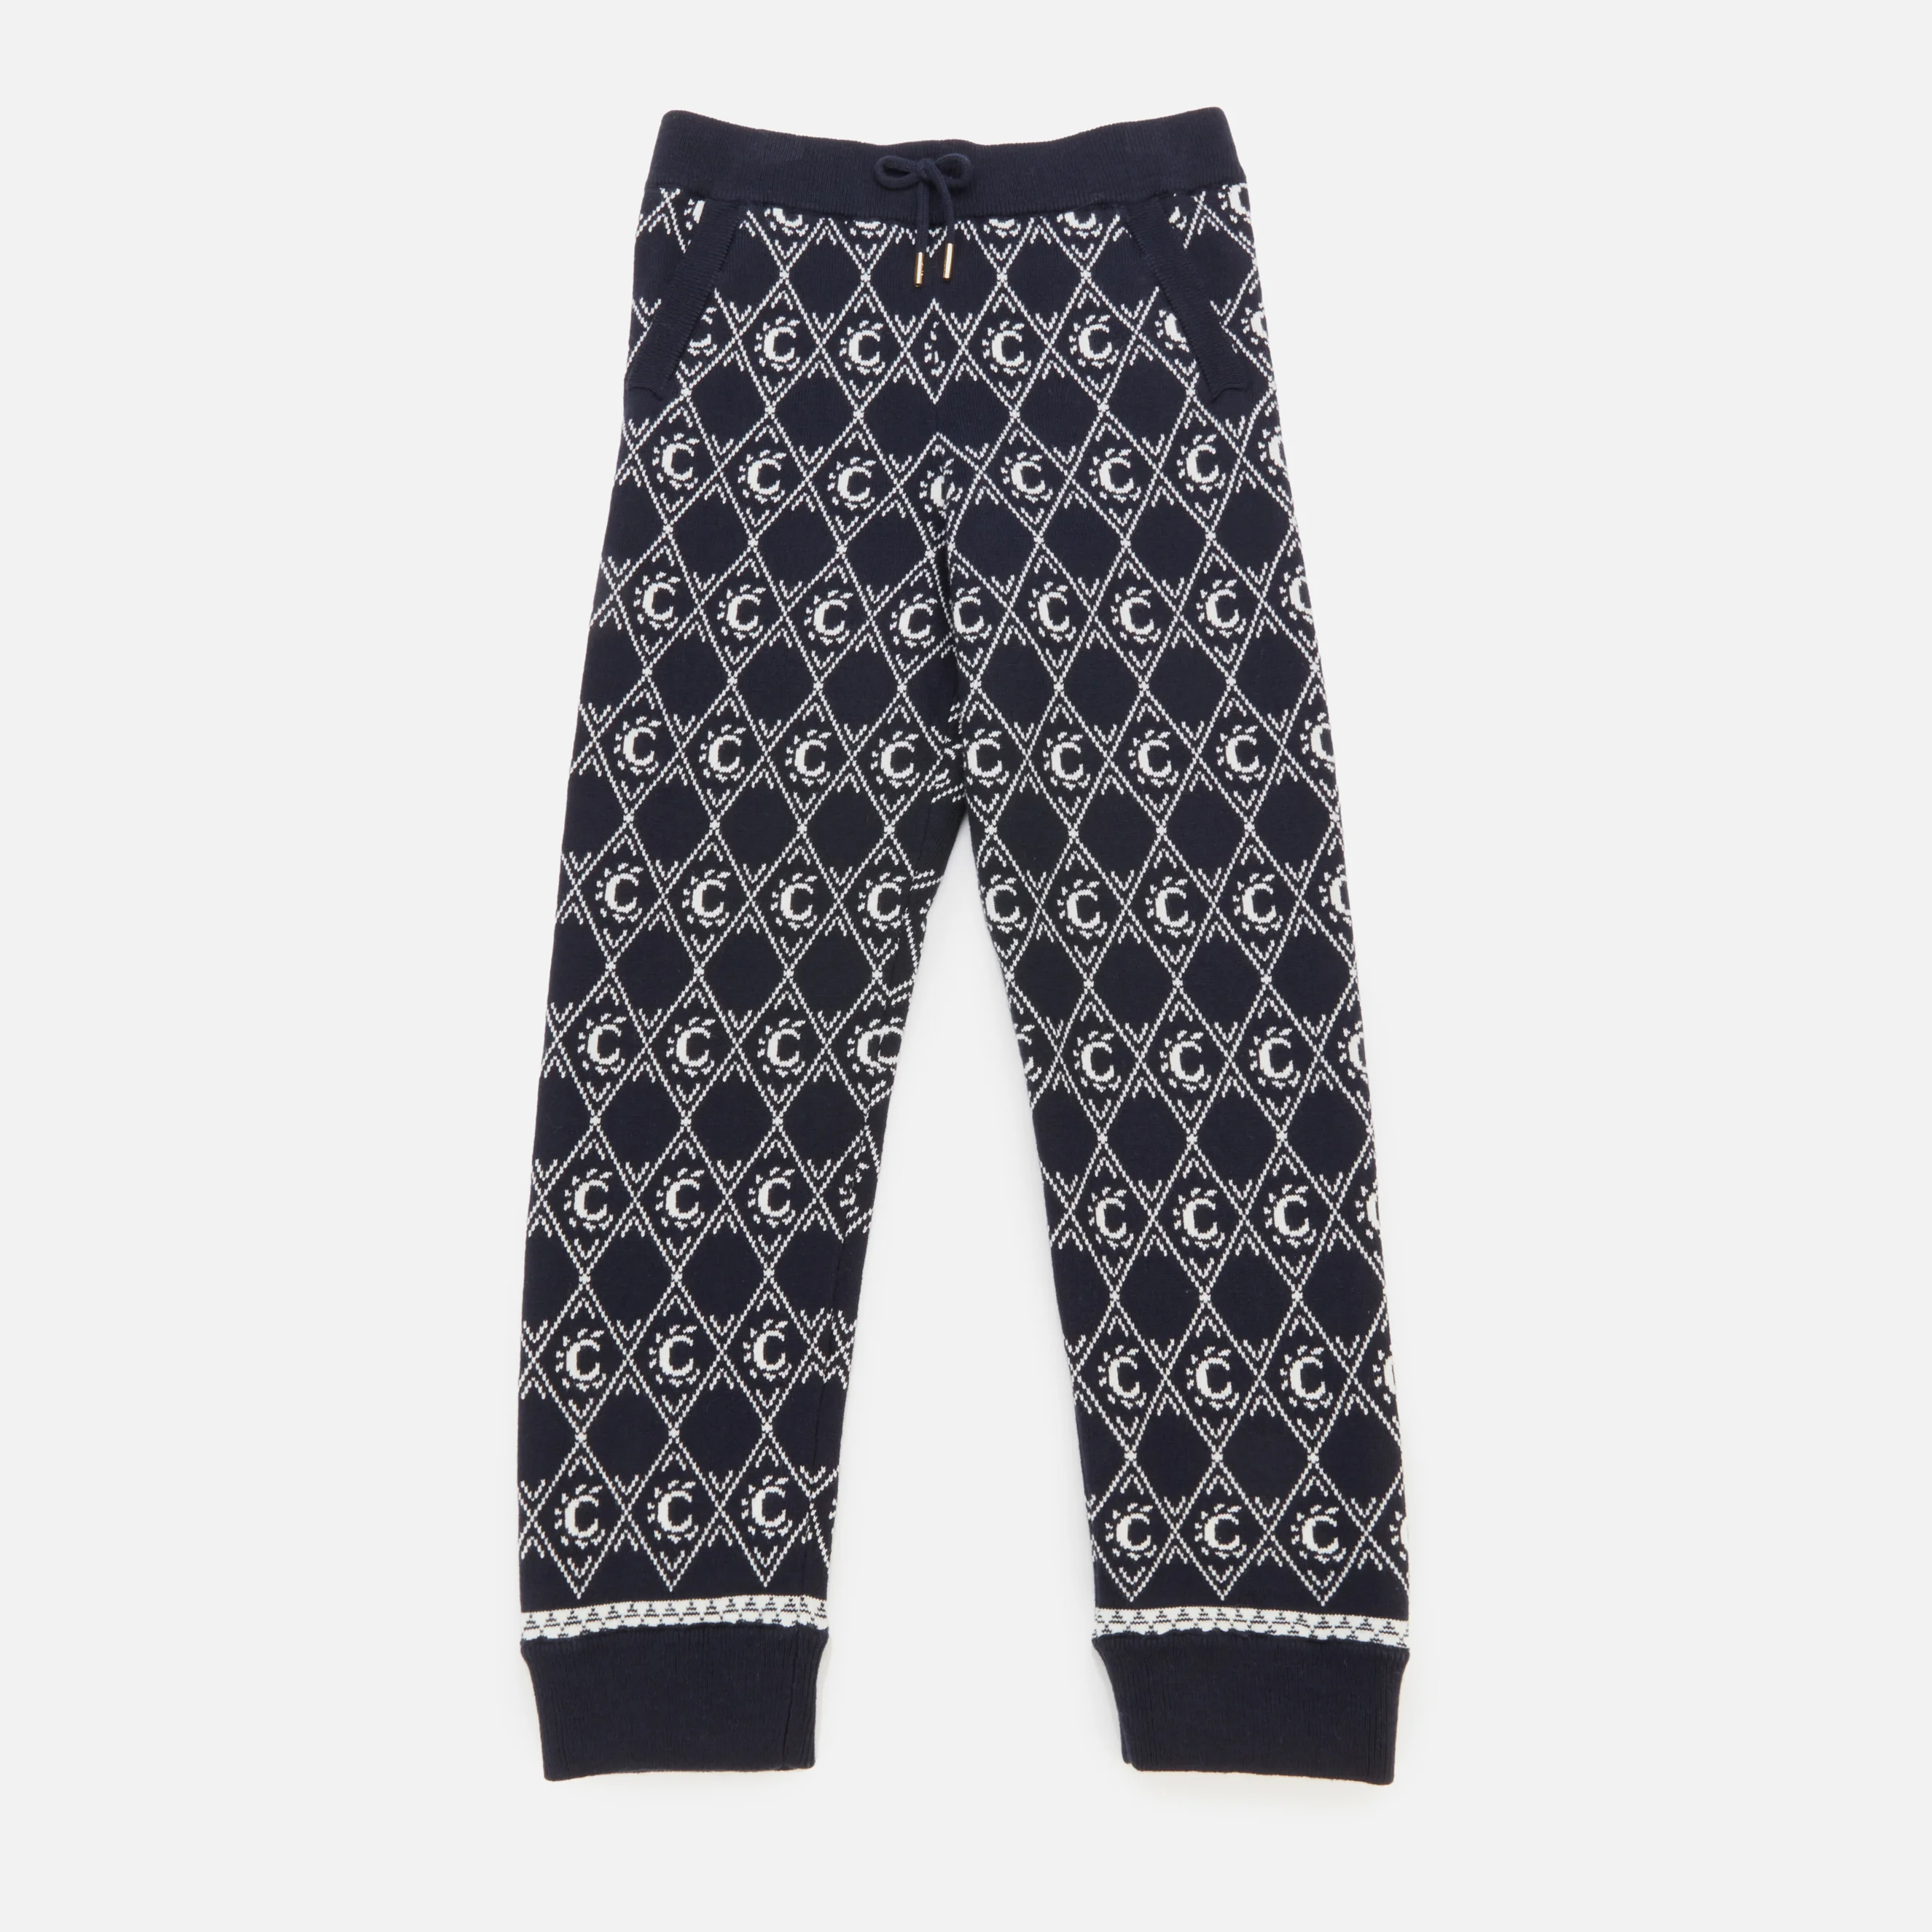 Chloé Girls' Knitted Trousers - Navy Image 1